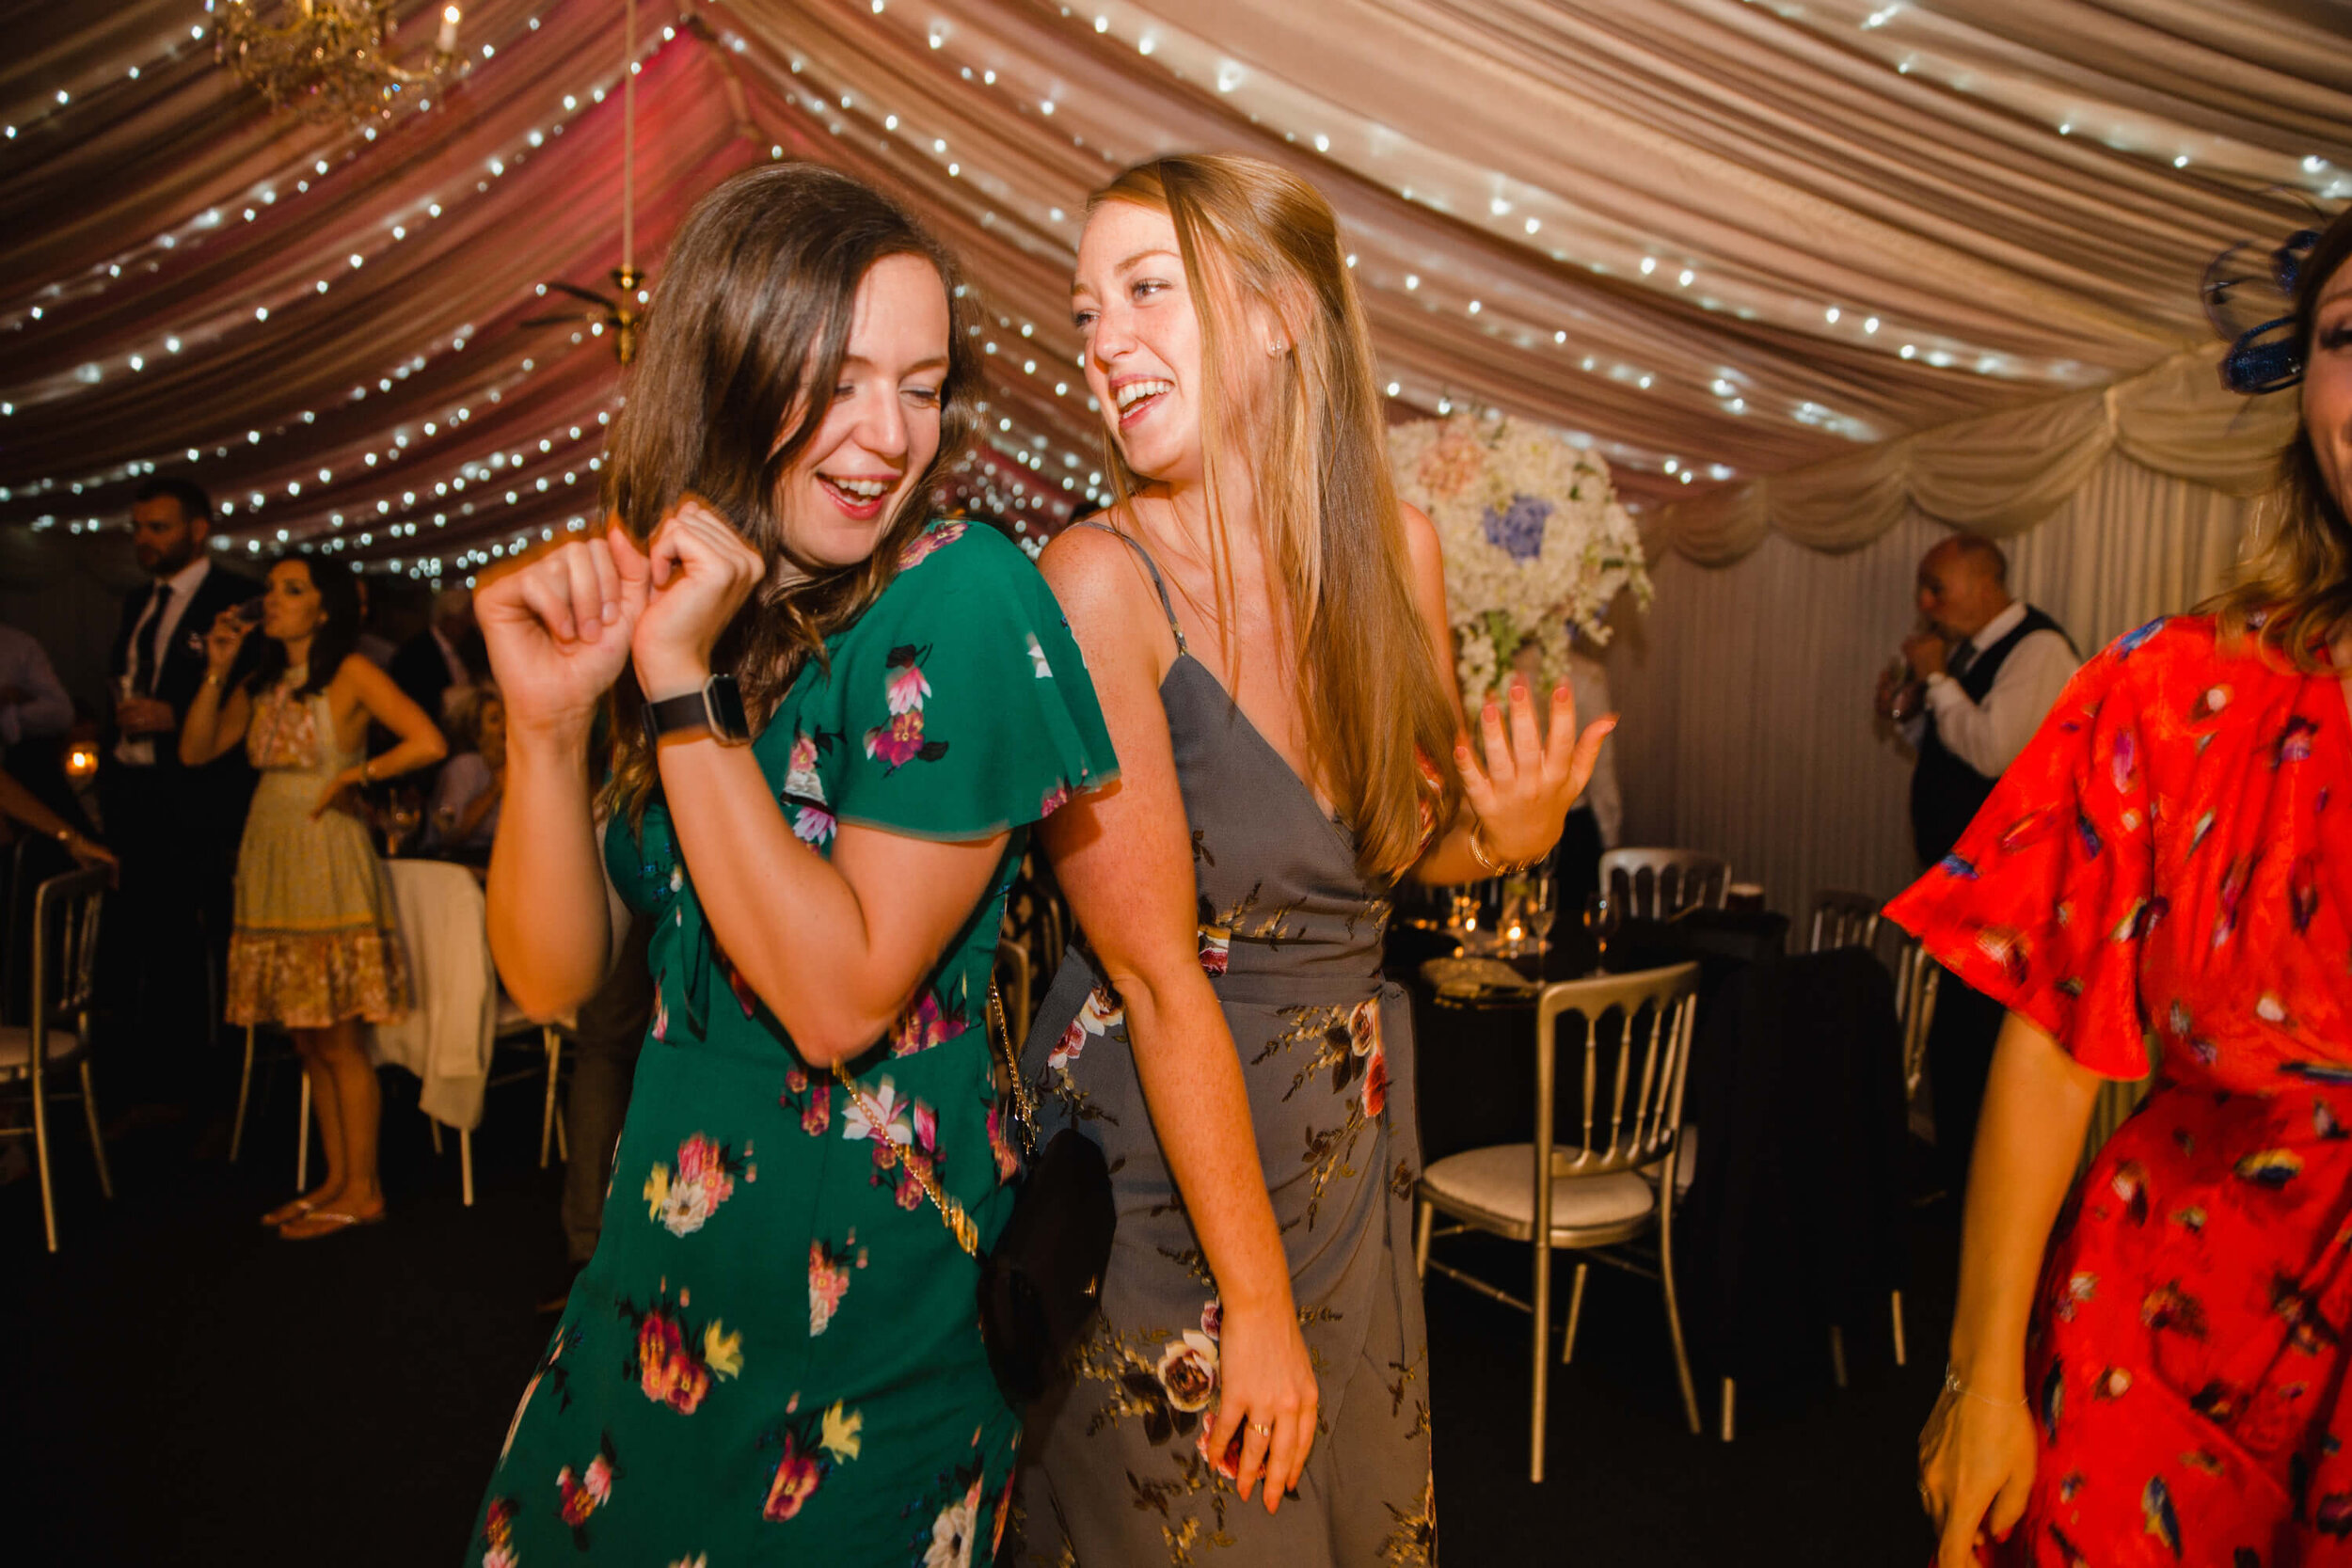 relaxed candid moment caught on camera as guests dance together